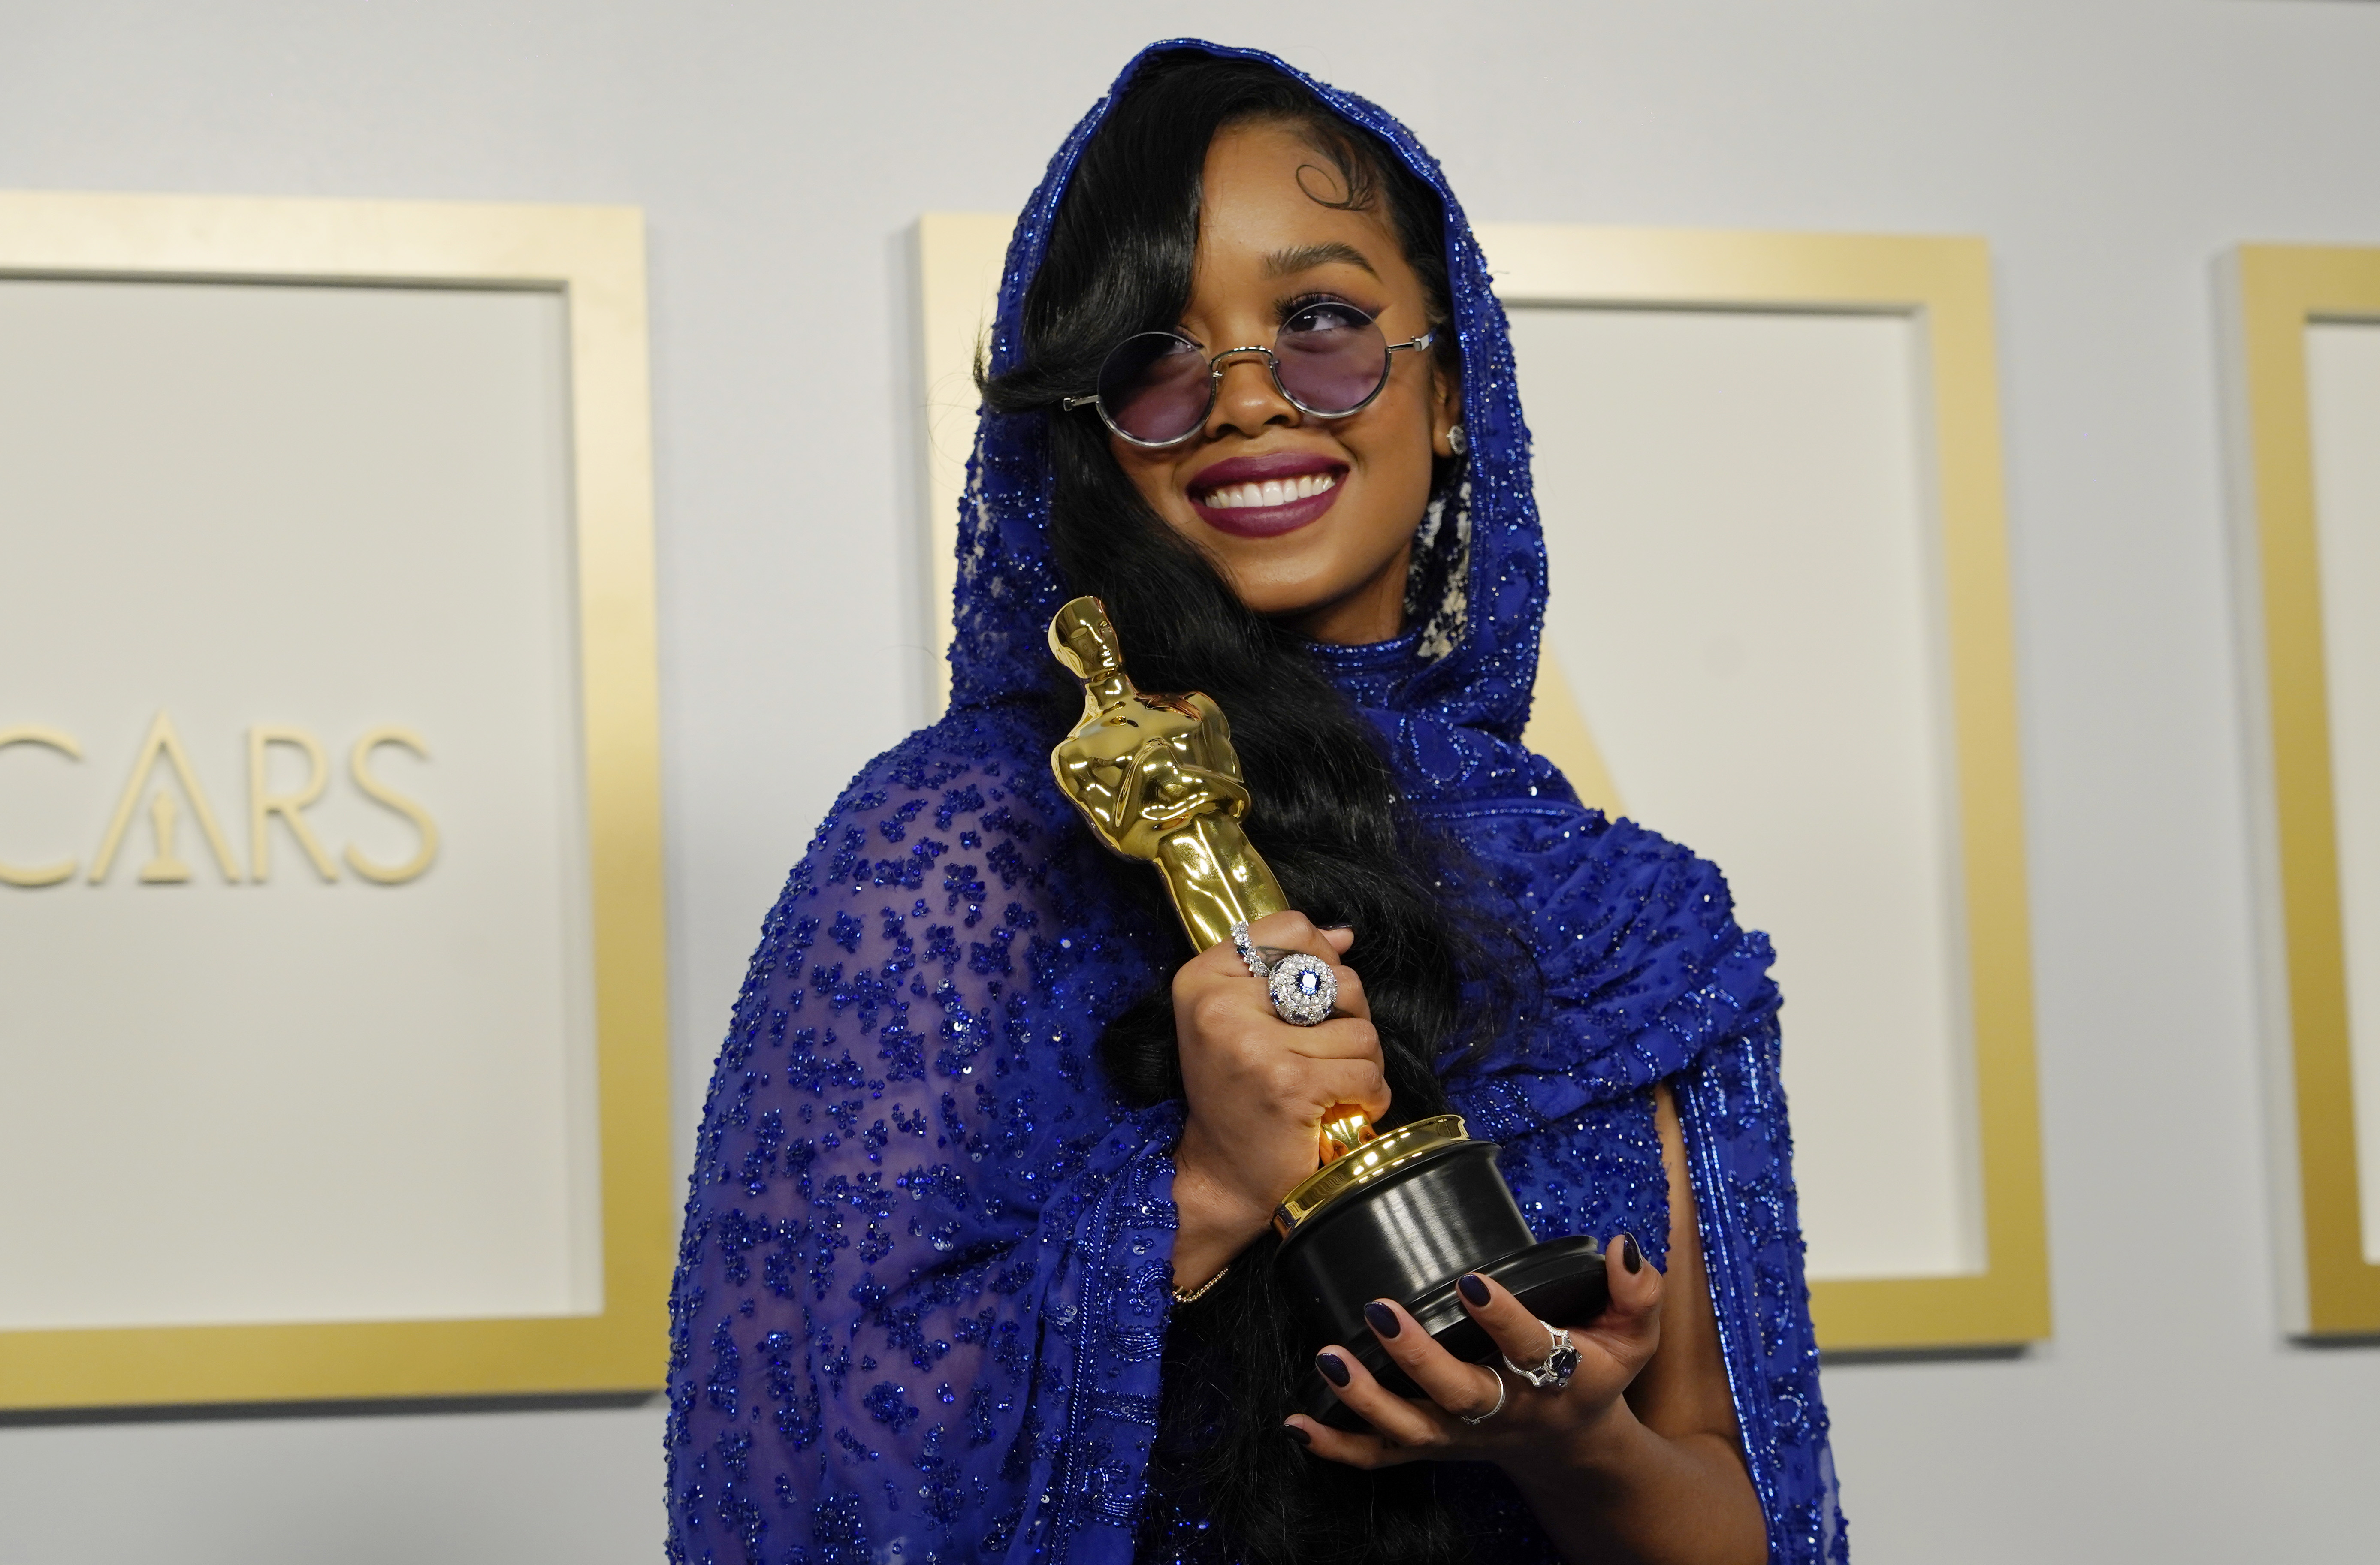 H.E.R. won best original song for "Fight For You" from "Judas and the Black Messiah" at the Oscars on Sunday in Los Angeles.